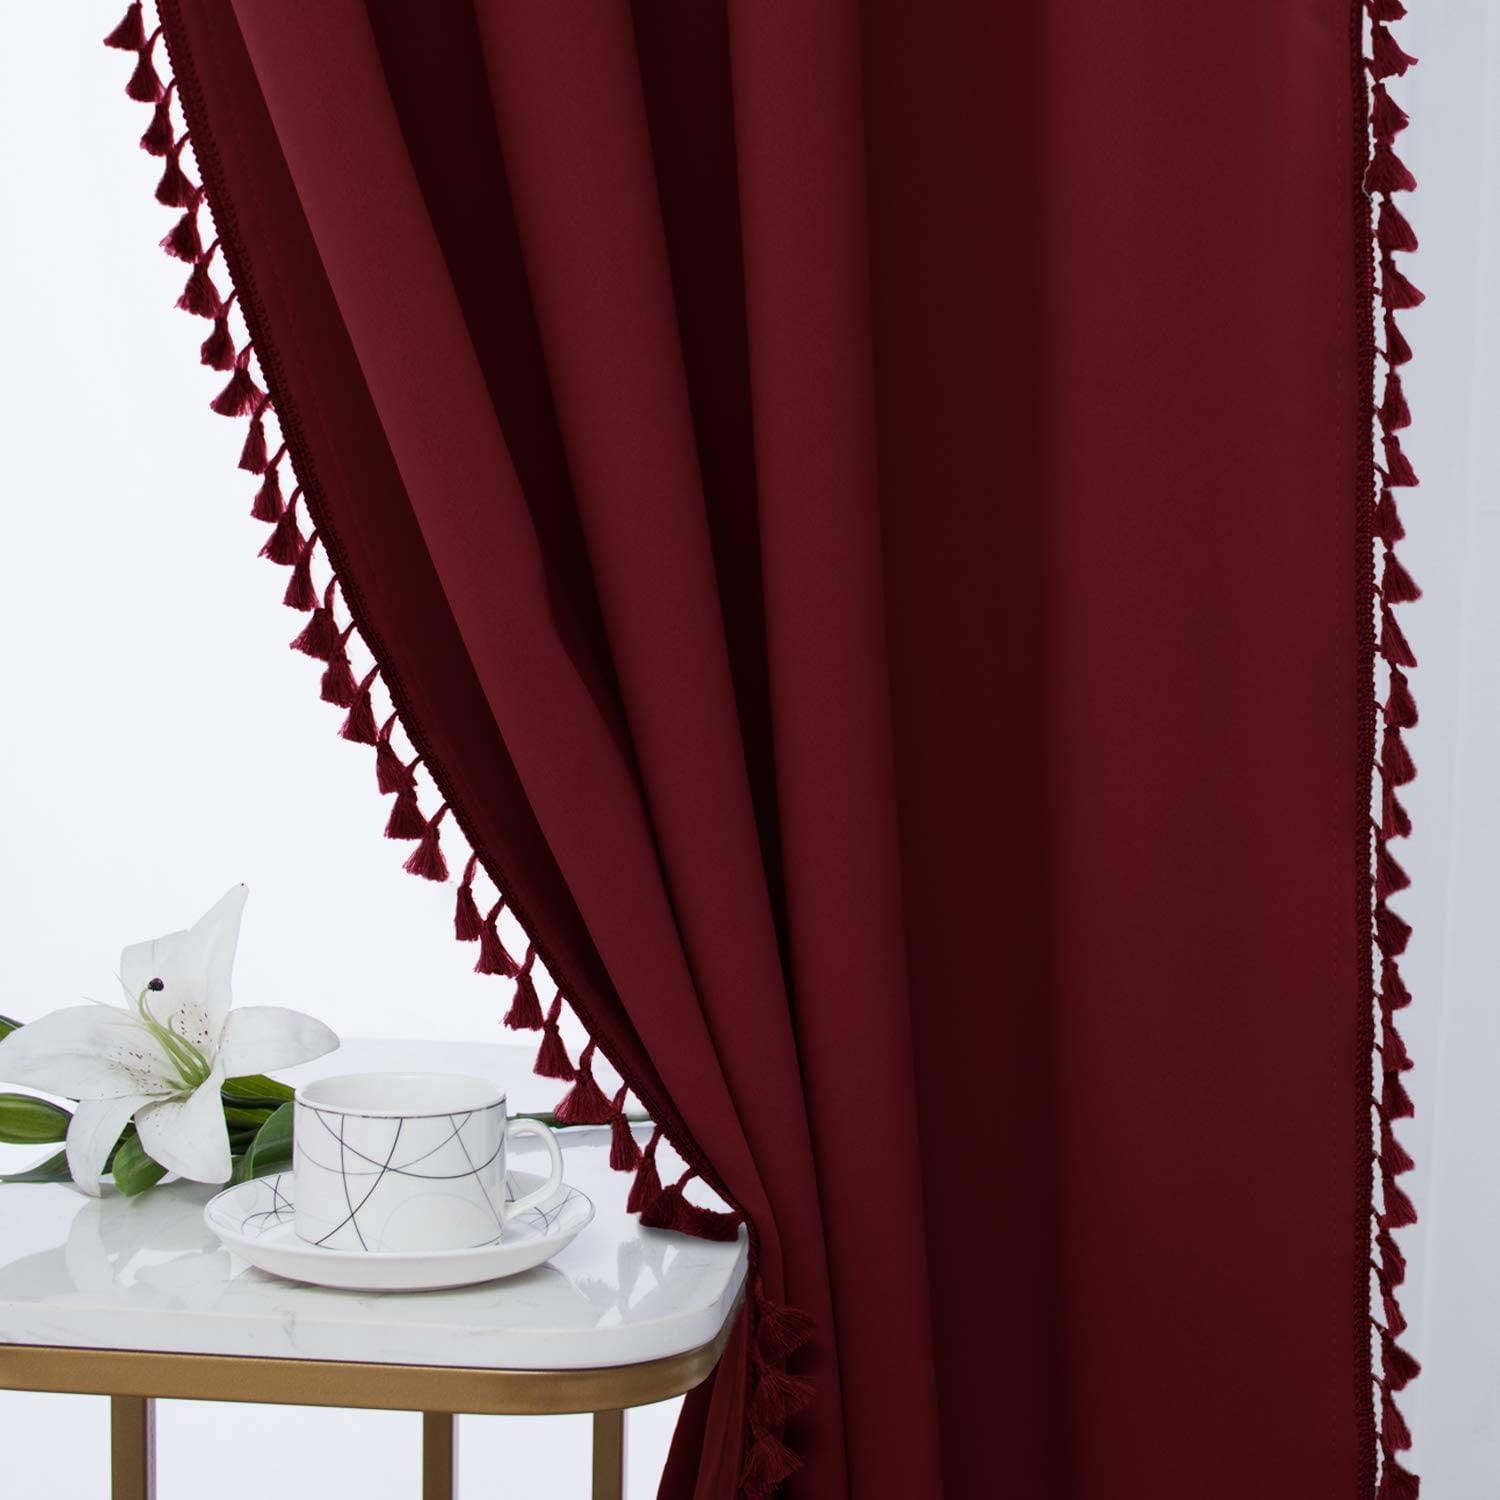 Details about   New Cotton Linen Curtain Tassel Living Room Window Bedroom Sheer Curtains Beige 